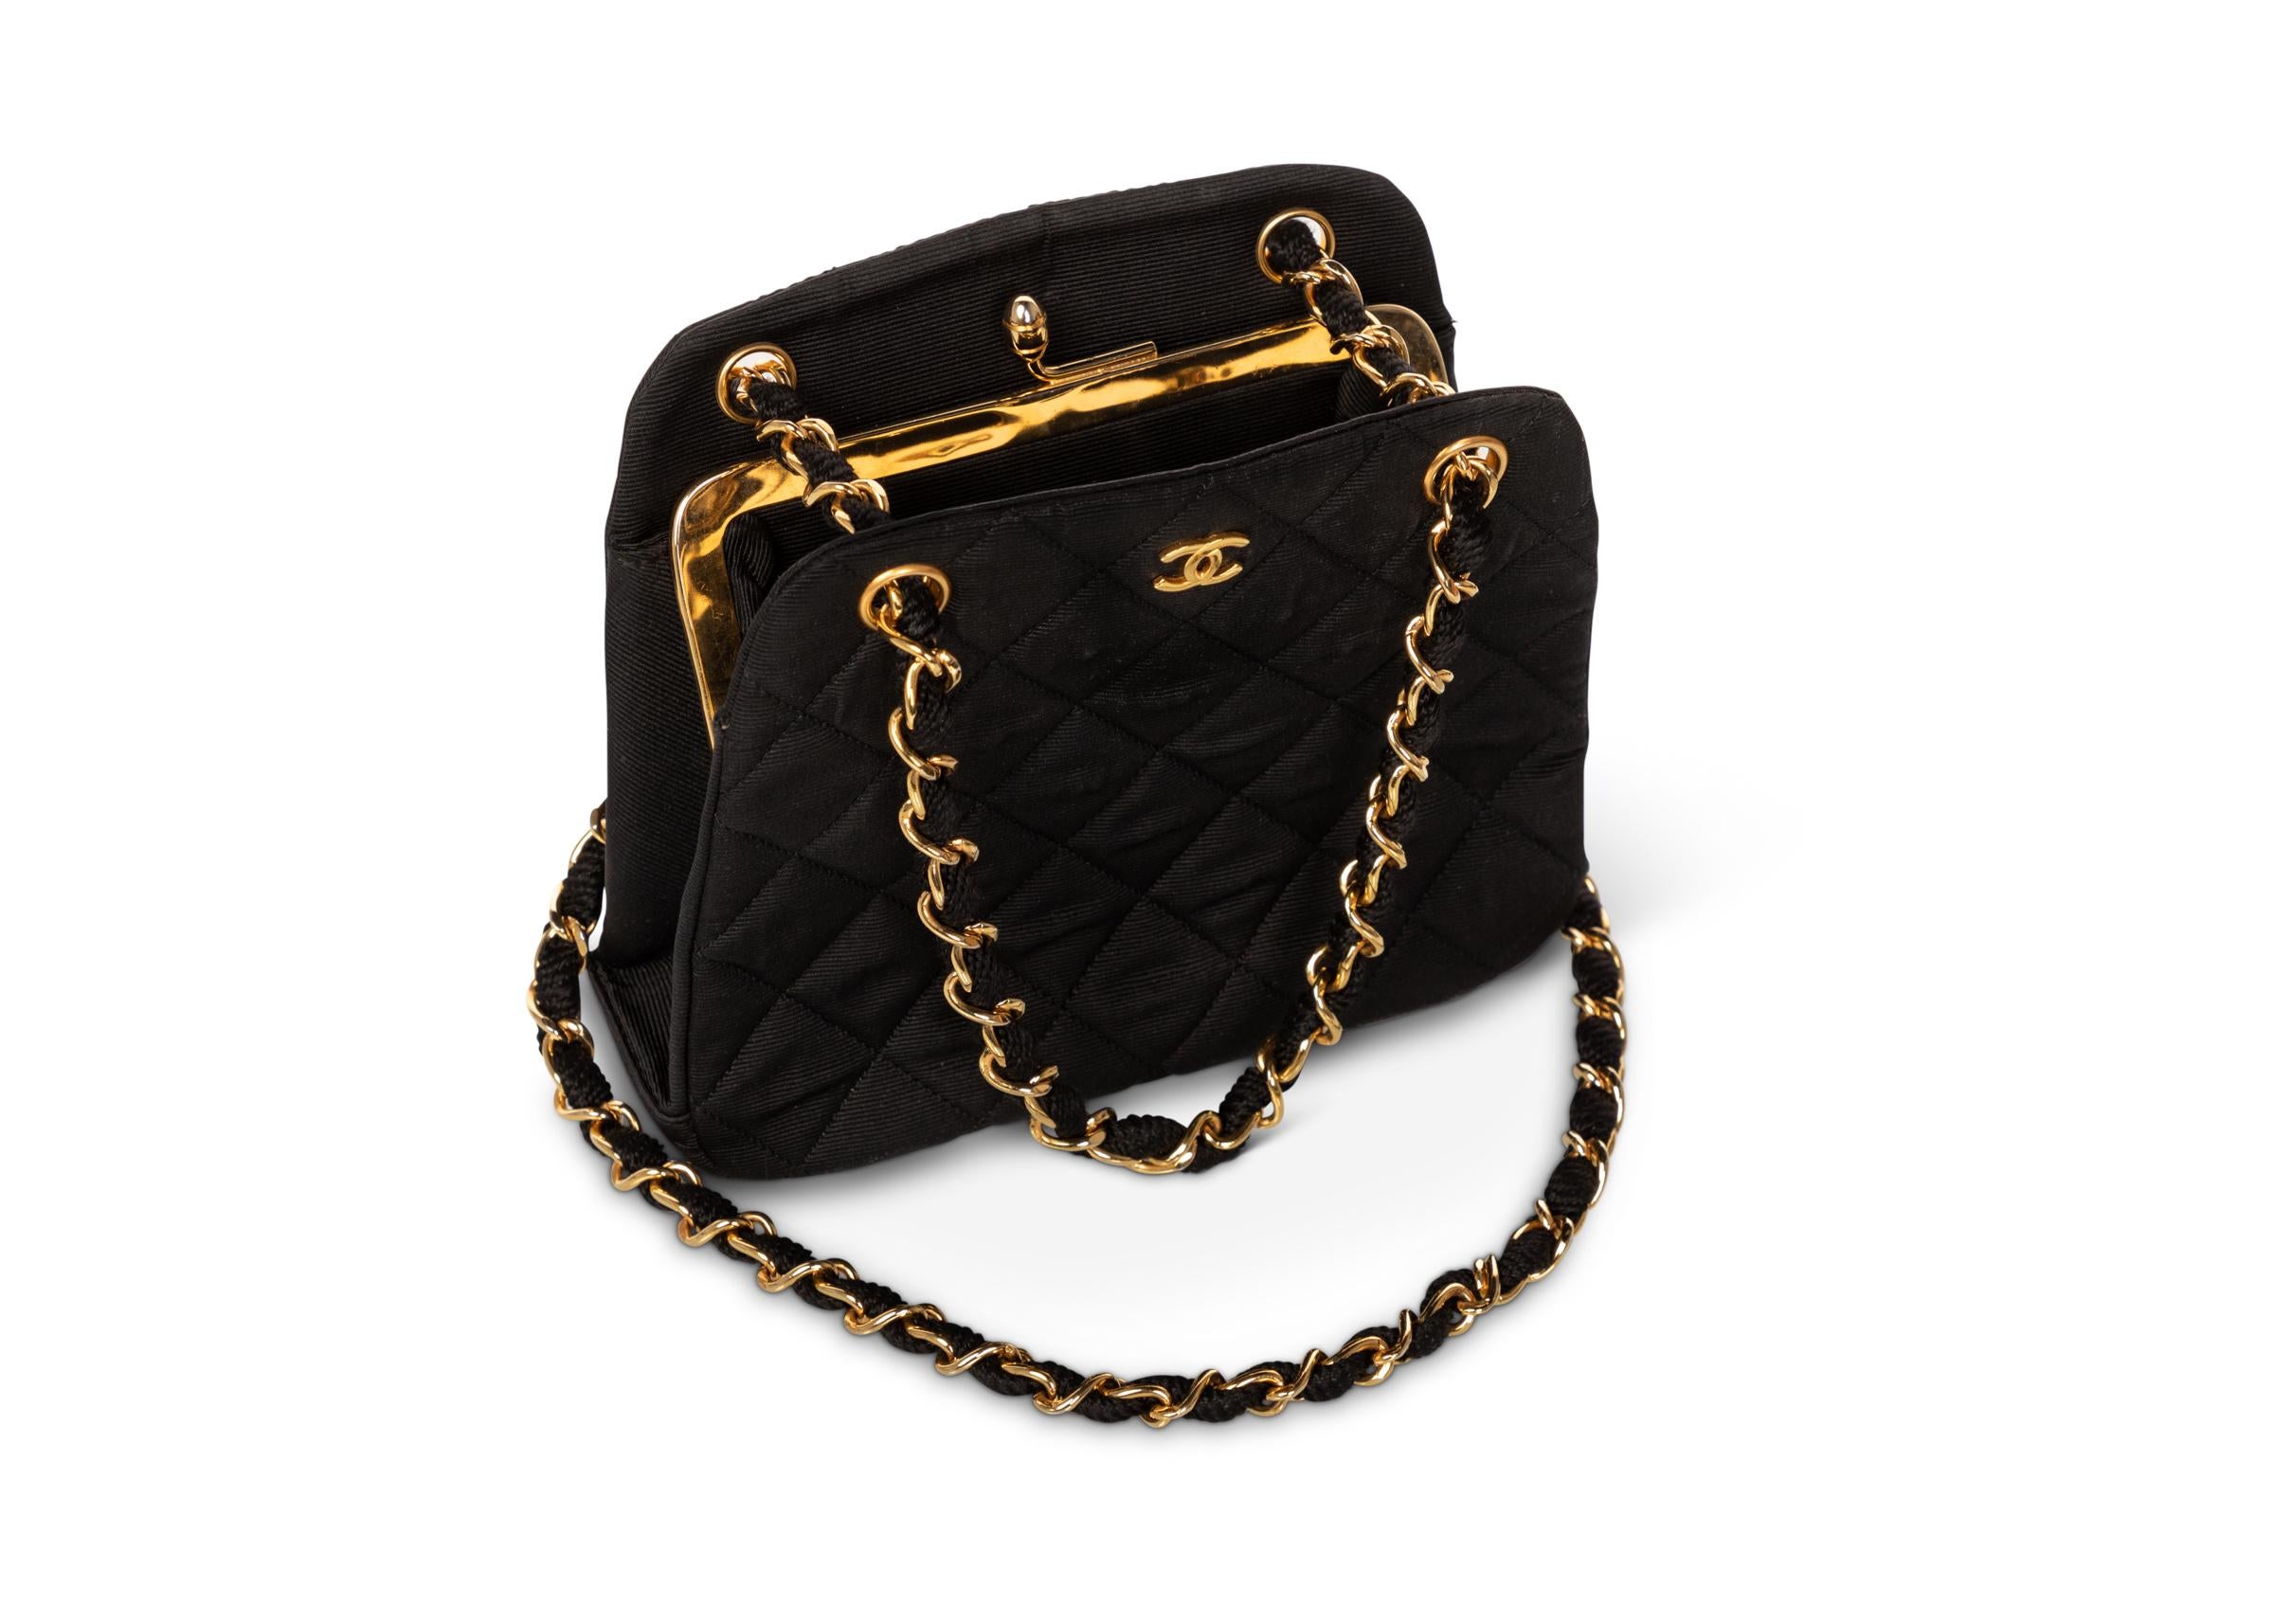 Chanel has commonly subscribed to the idea that less is more. Often times, Chanel designs are coveted for their subtlety and practicality. This Chanel bag is a perfect example. Made from a jet-black faille, the bag has been lightly quilted. The